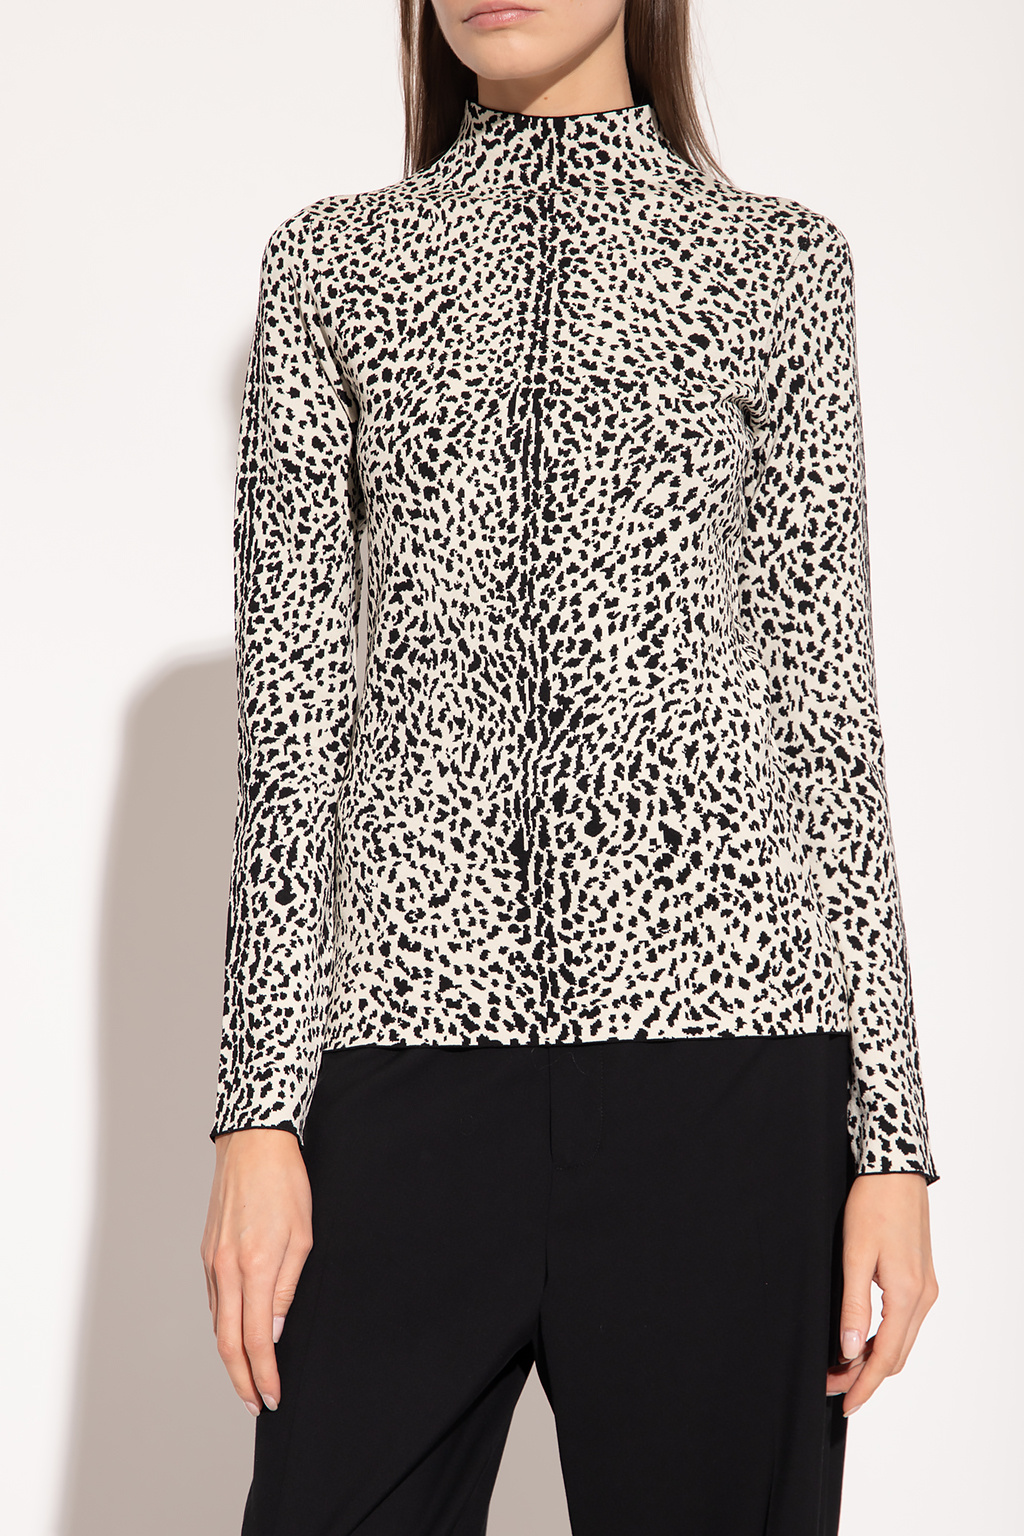 Proenza Schouler Top with stand collar